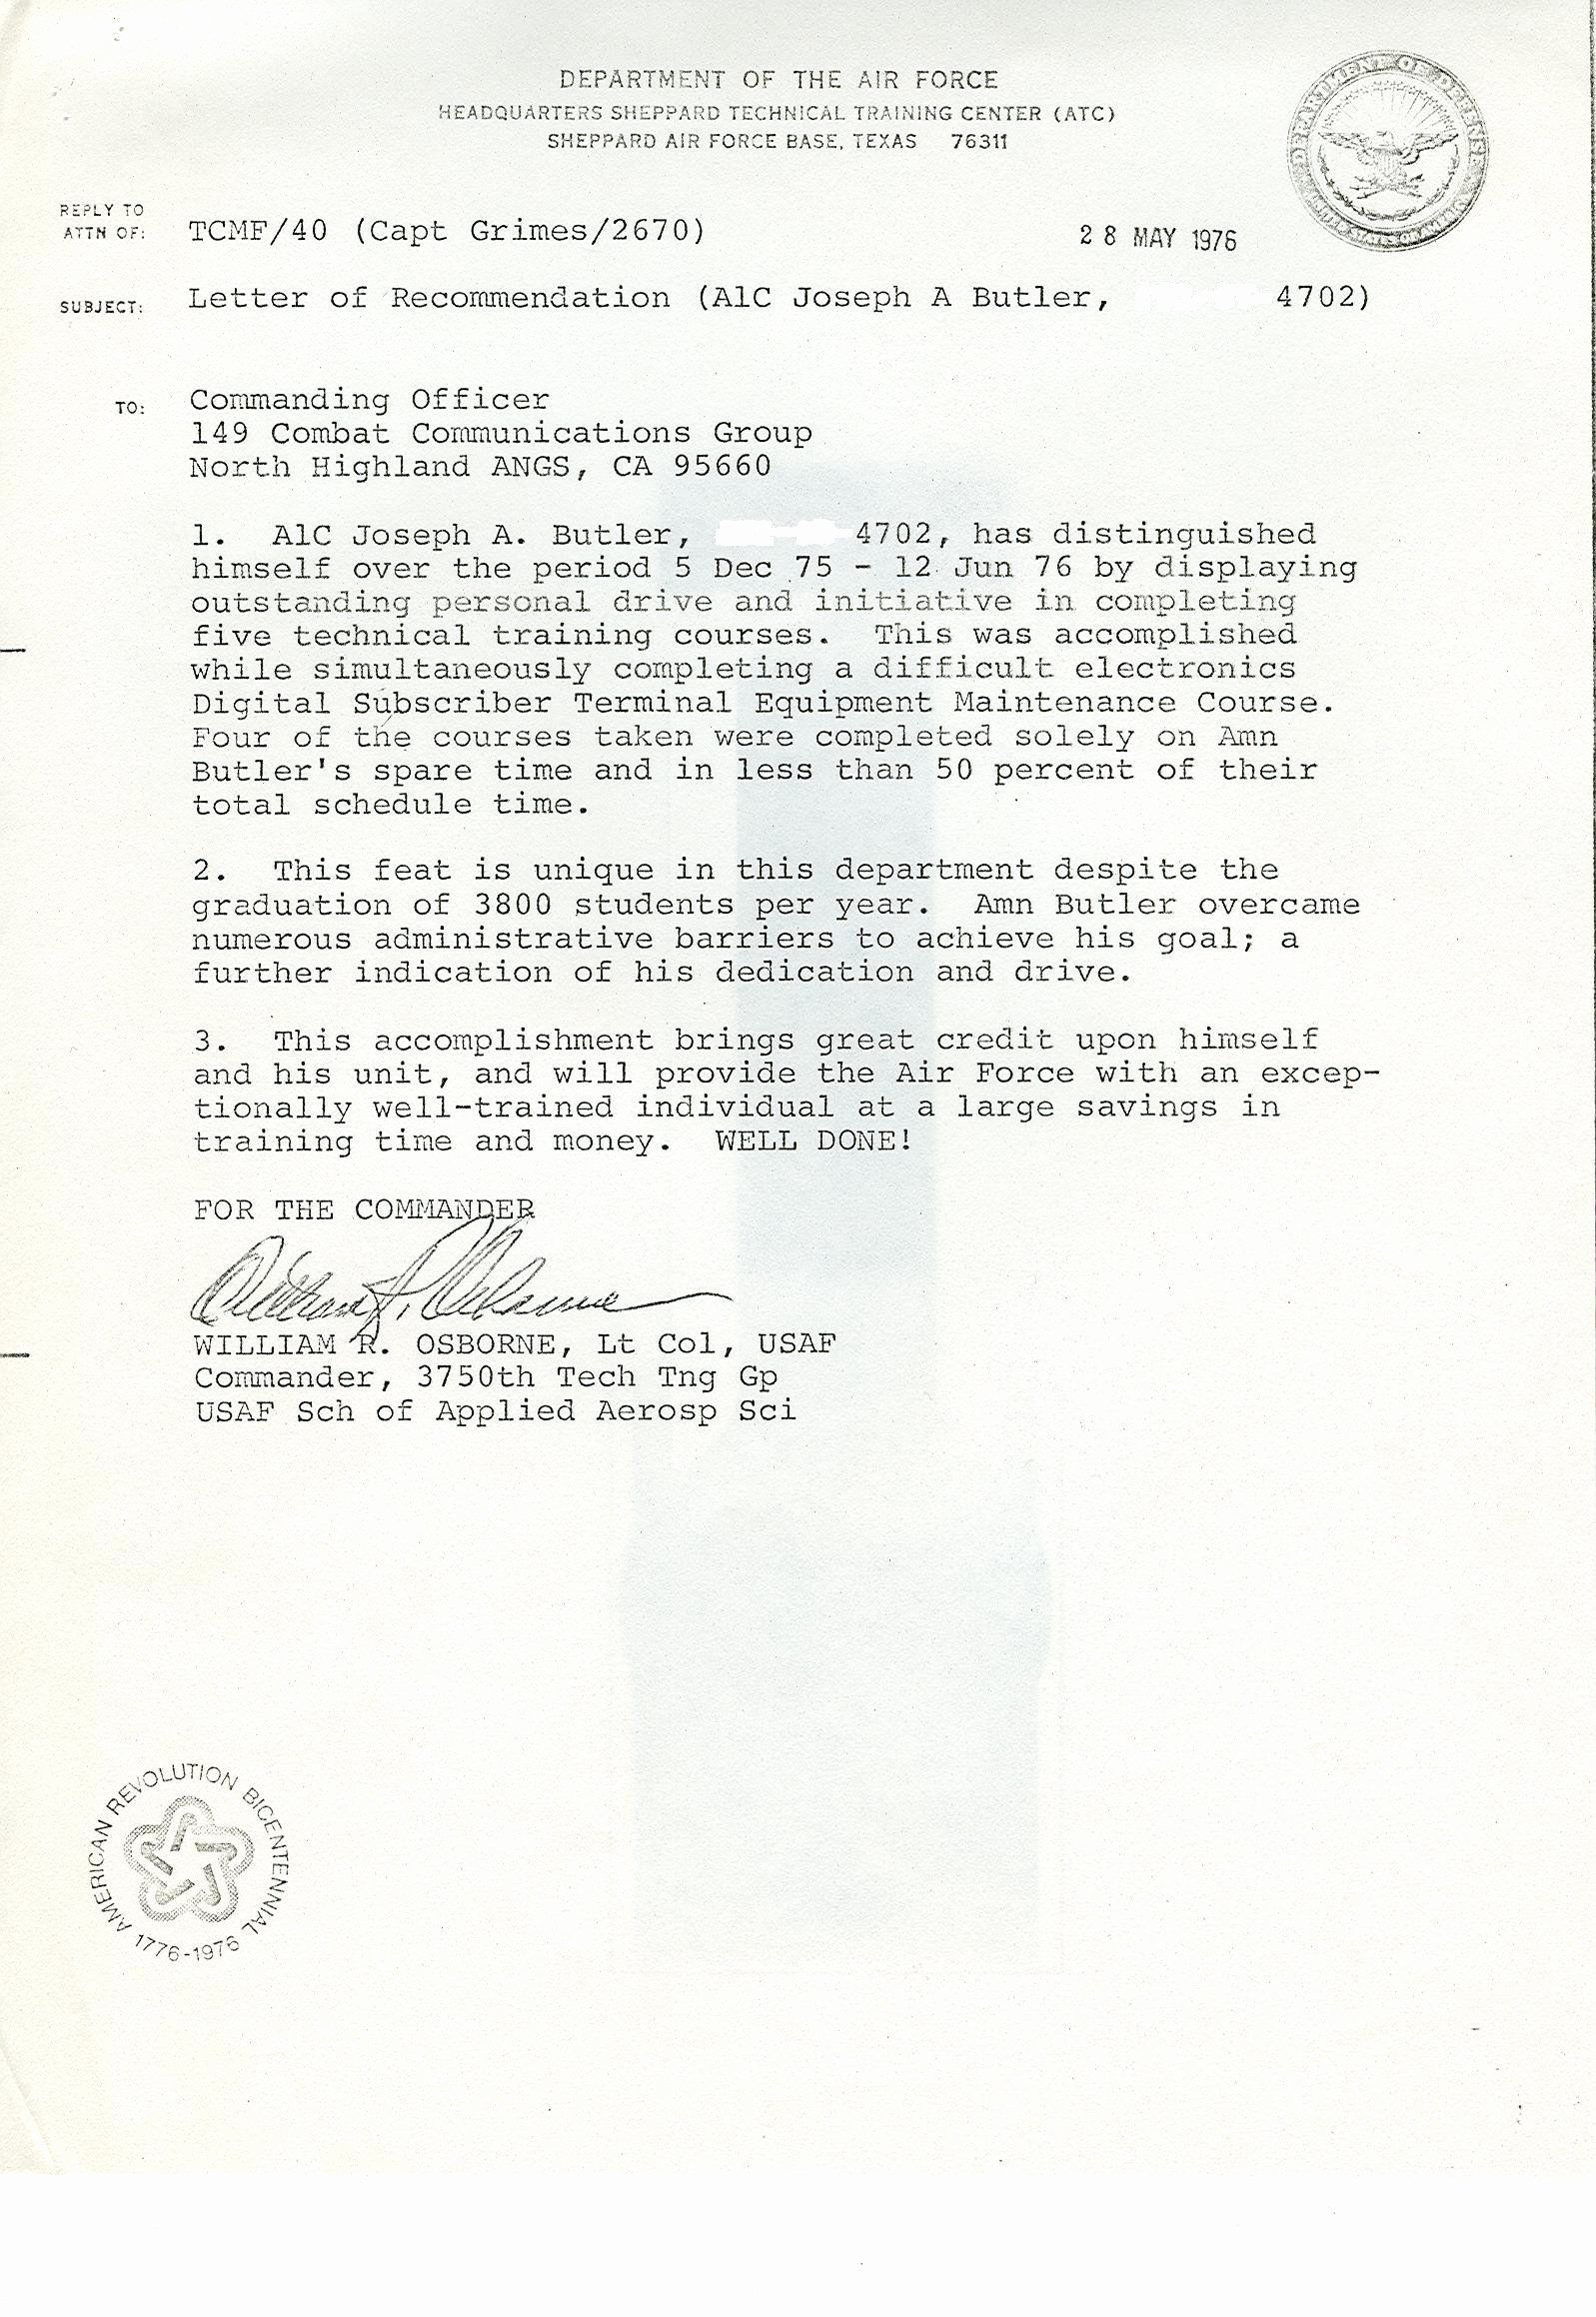 30 Letter Of Recommendation Military In 2020 Letter Of with regard to dimensions 1597 X 2318